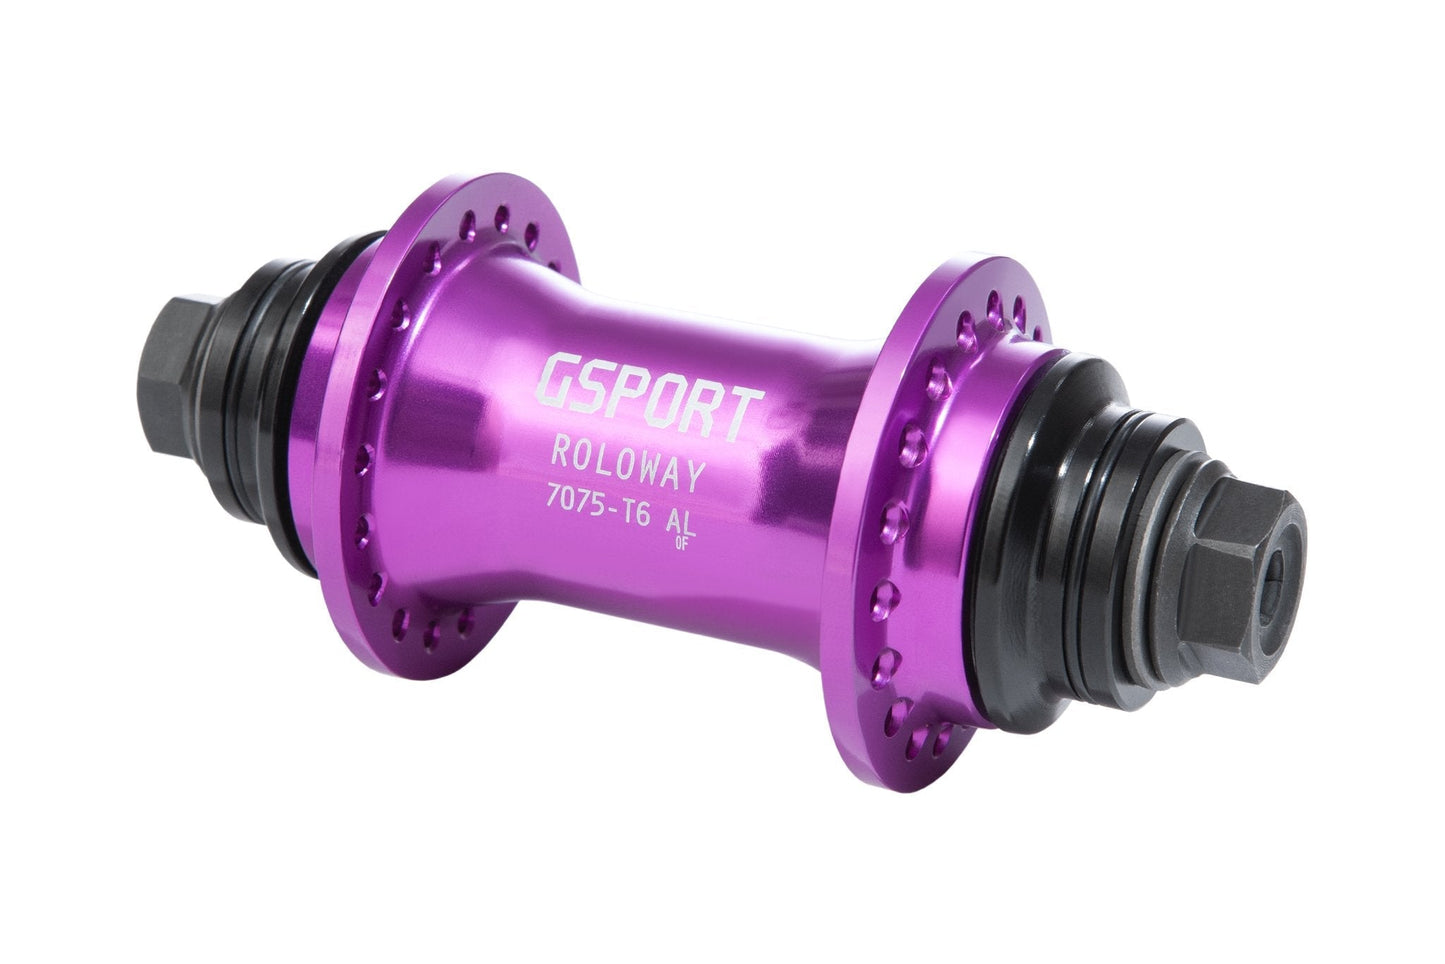 GSport Roloway Front Hub (Anodized Purple)